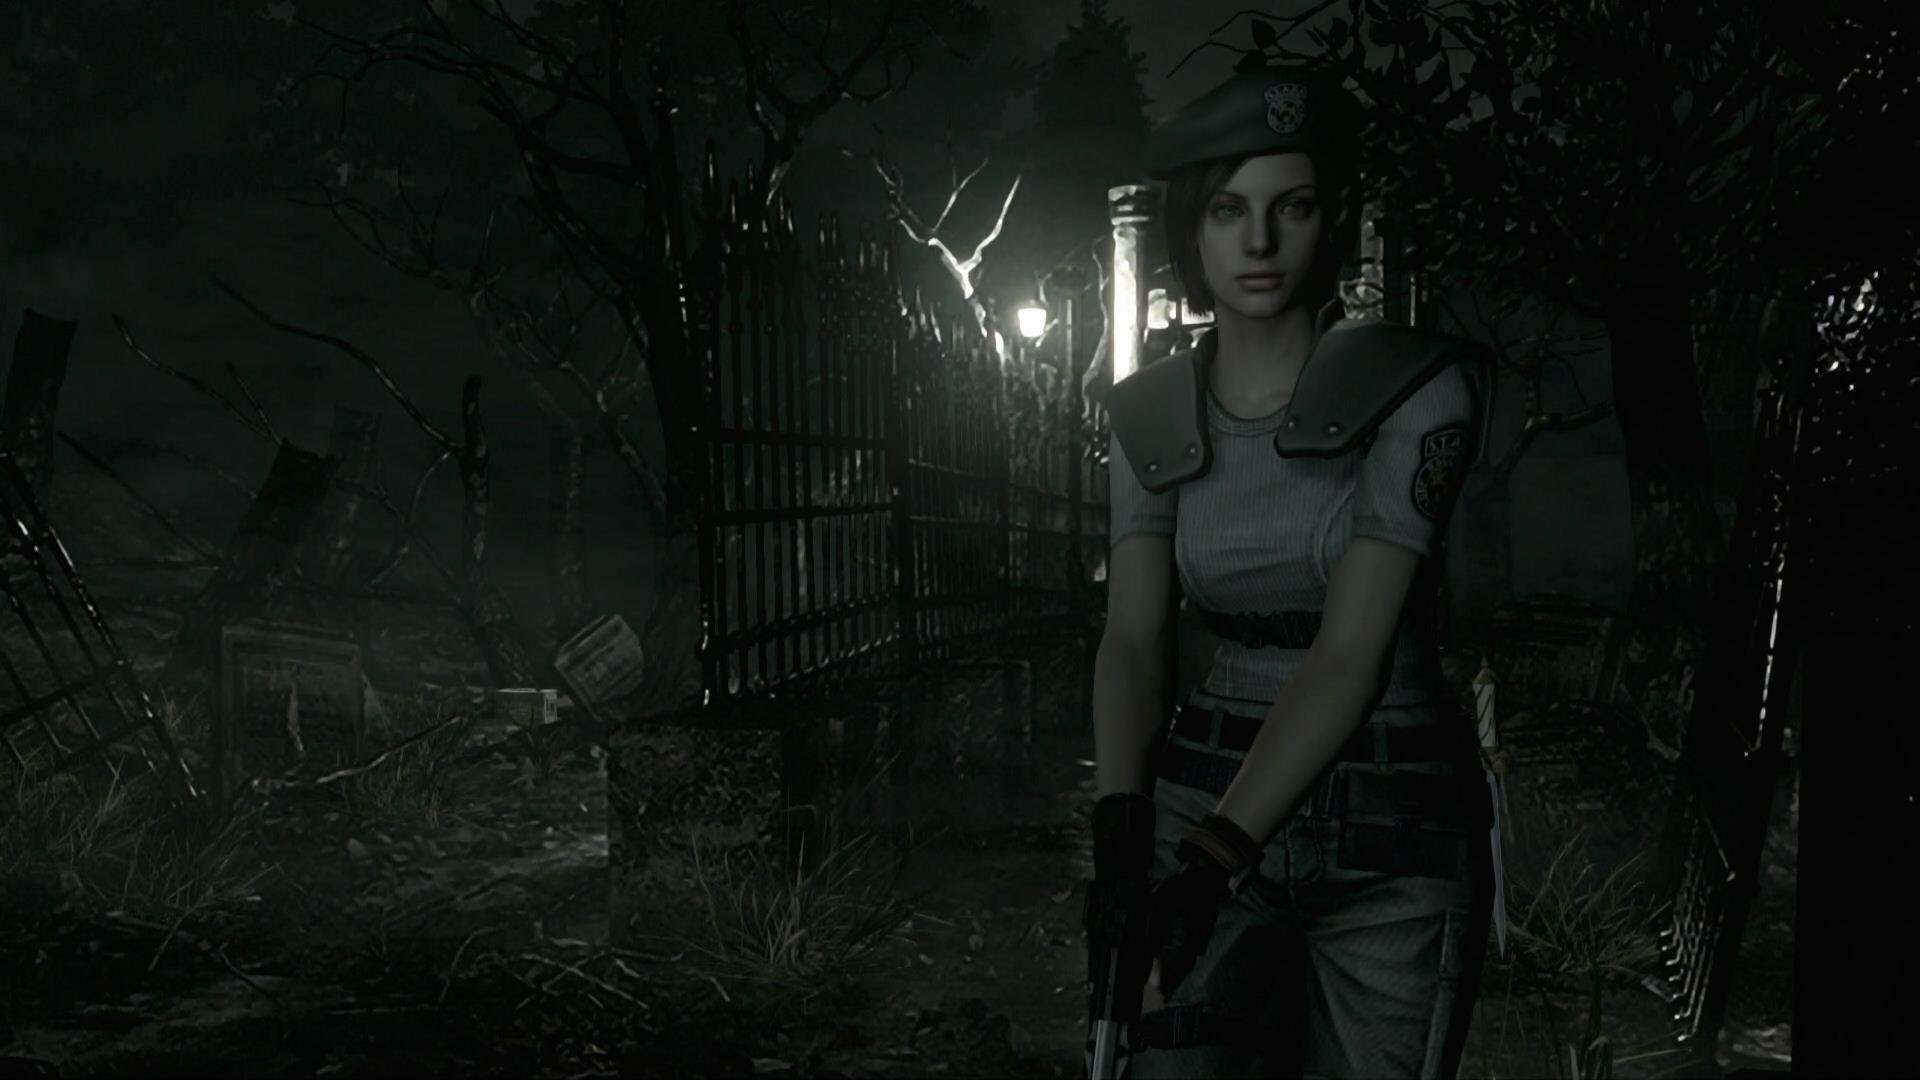 resident-evil-hd-remaster-system-requirements-are-revealed-game-news